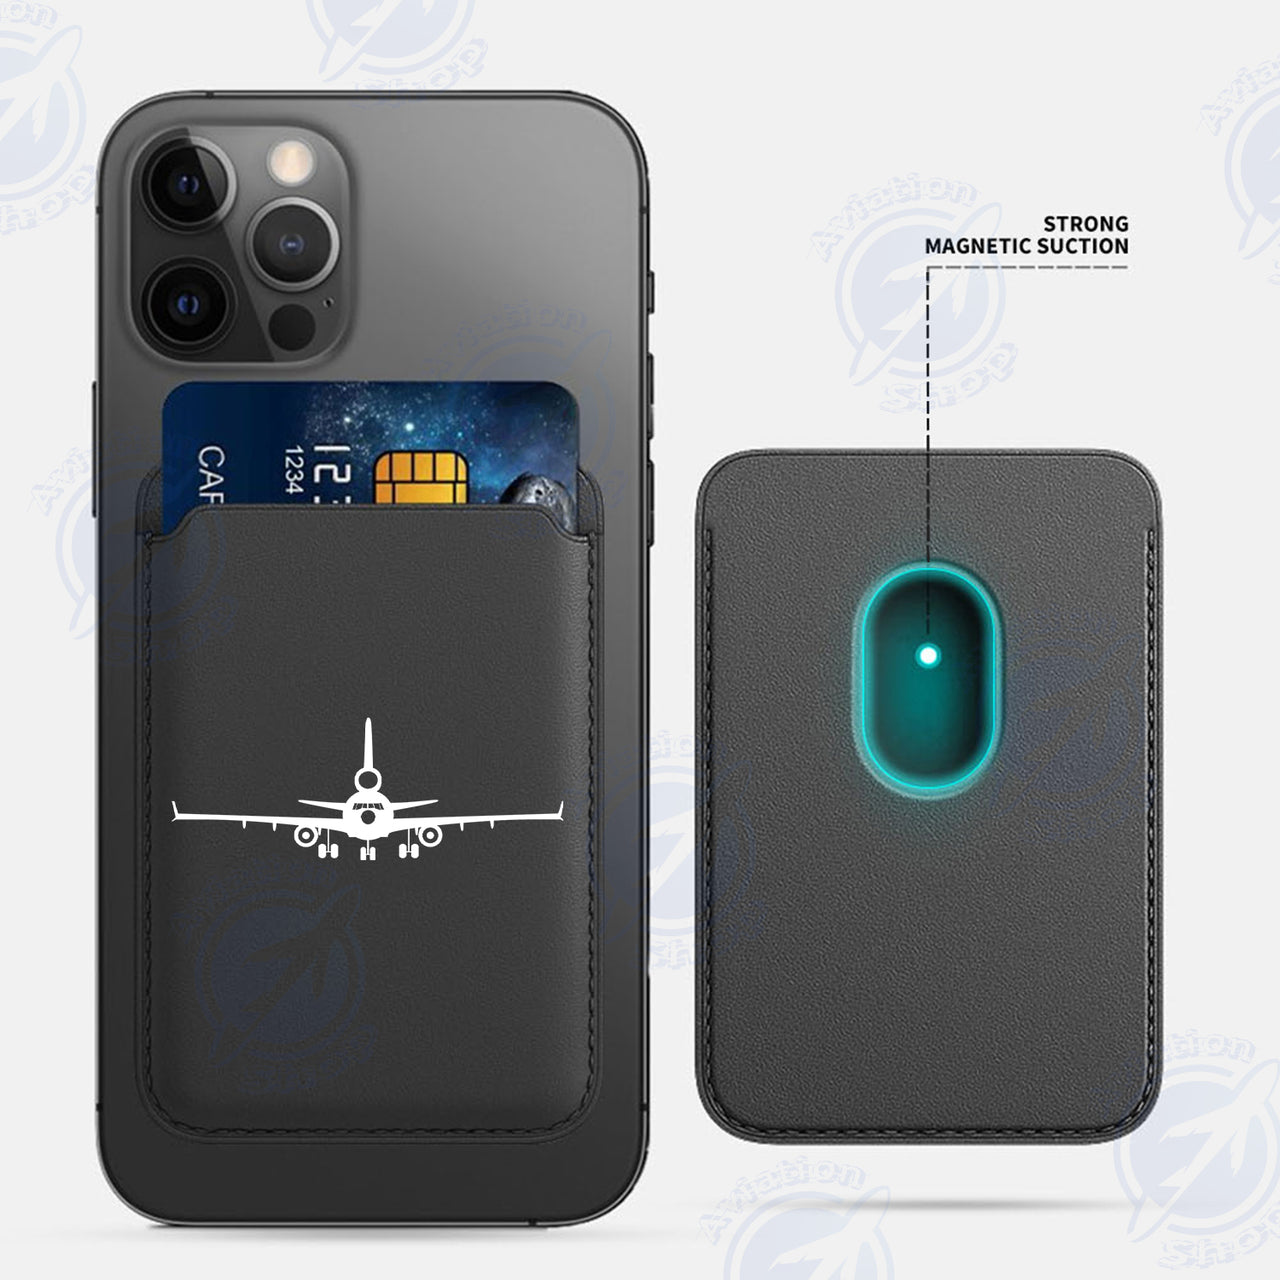 McDonnell Douglas MD-11 Silhouette Plane iPhone Cases Magnetic Card Wallet